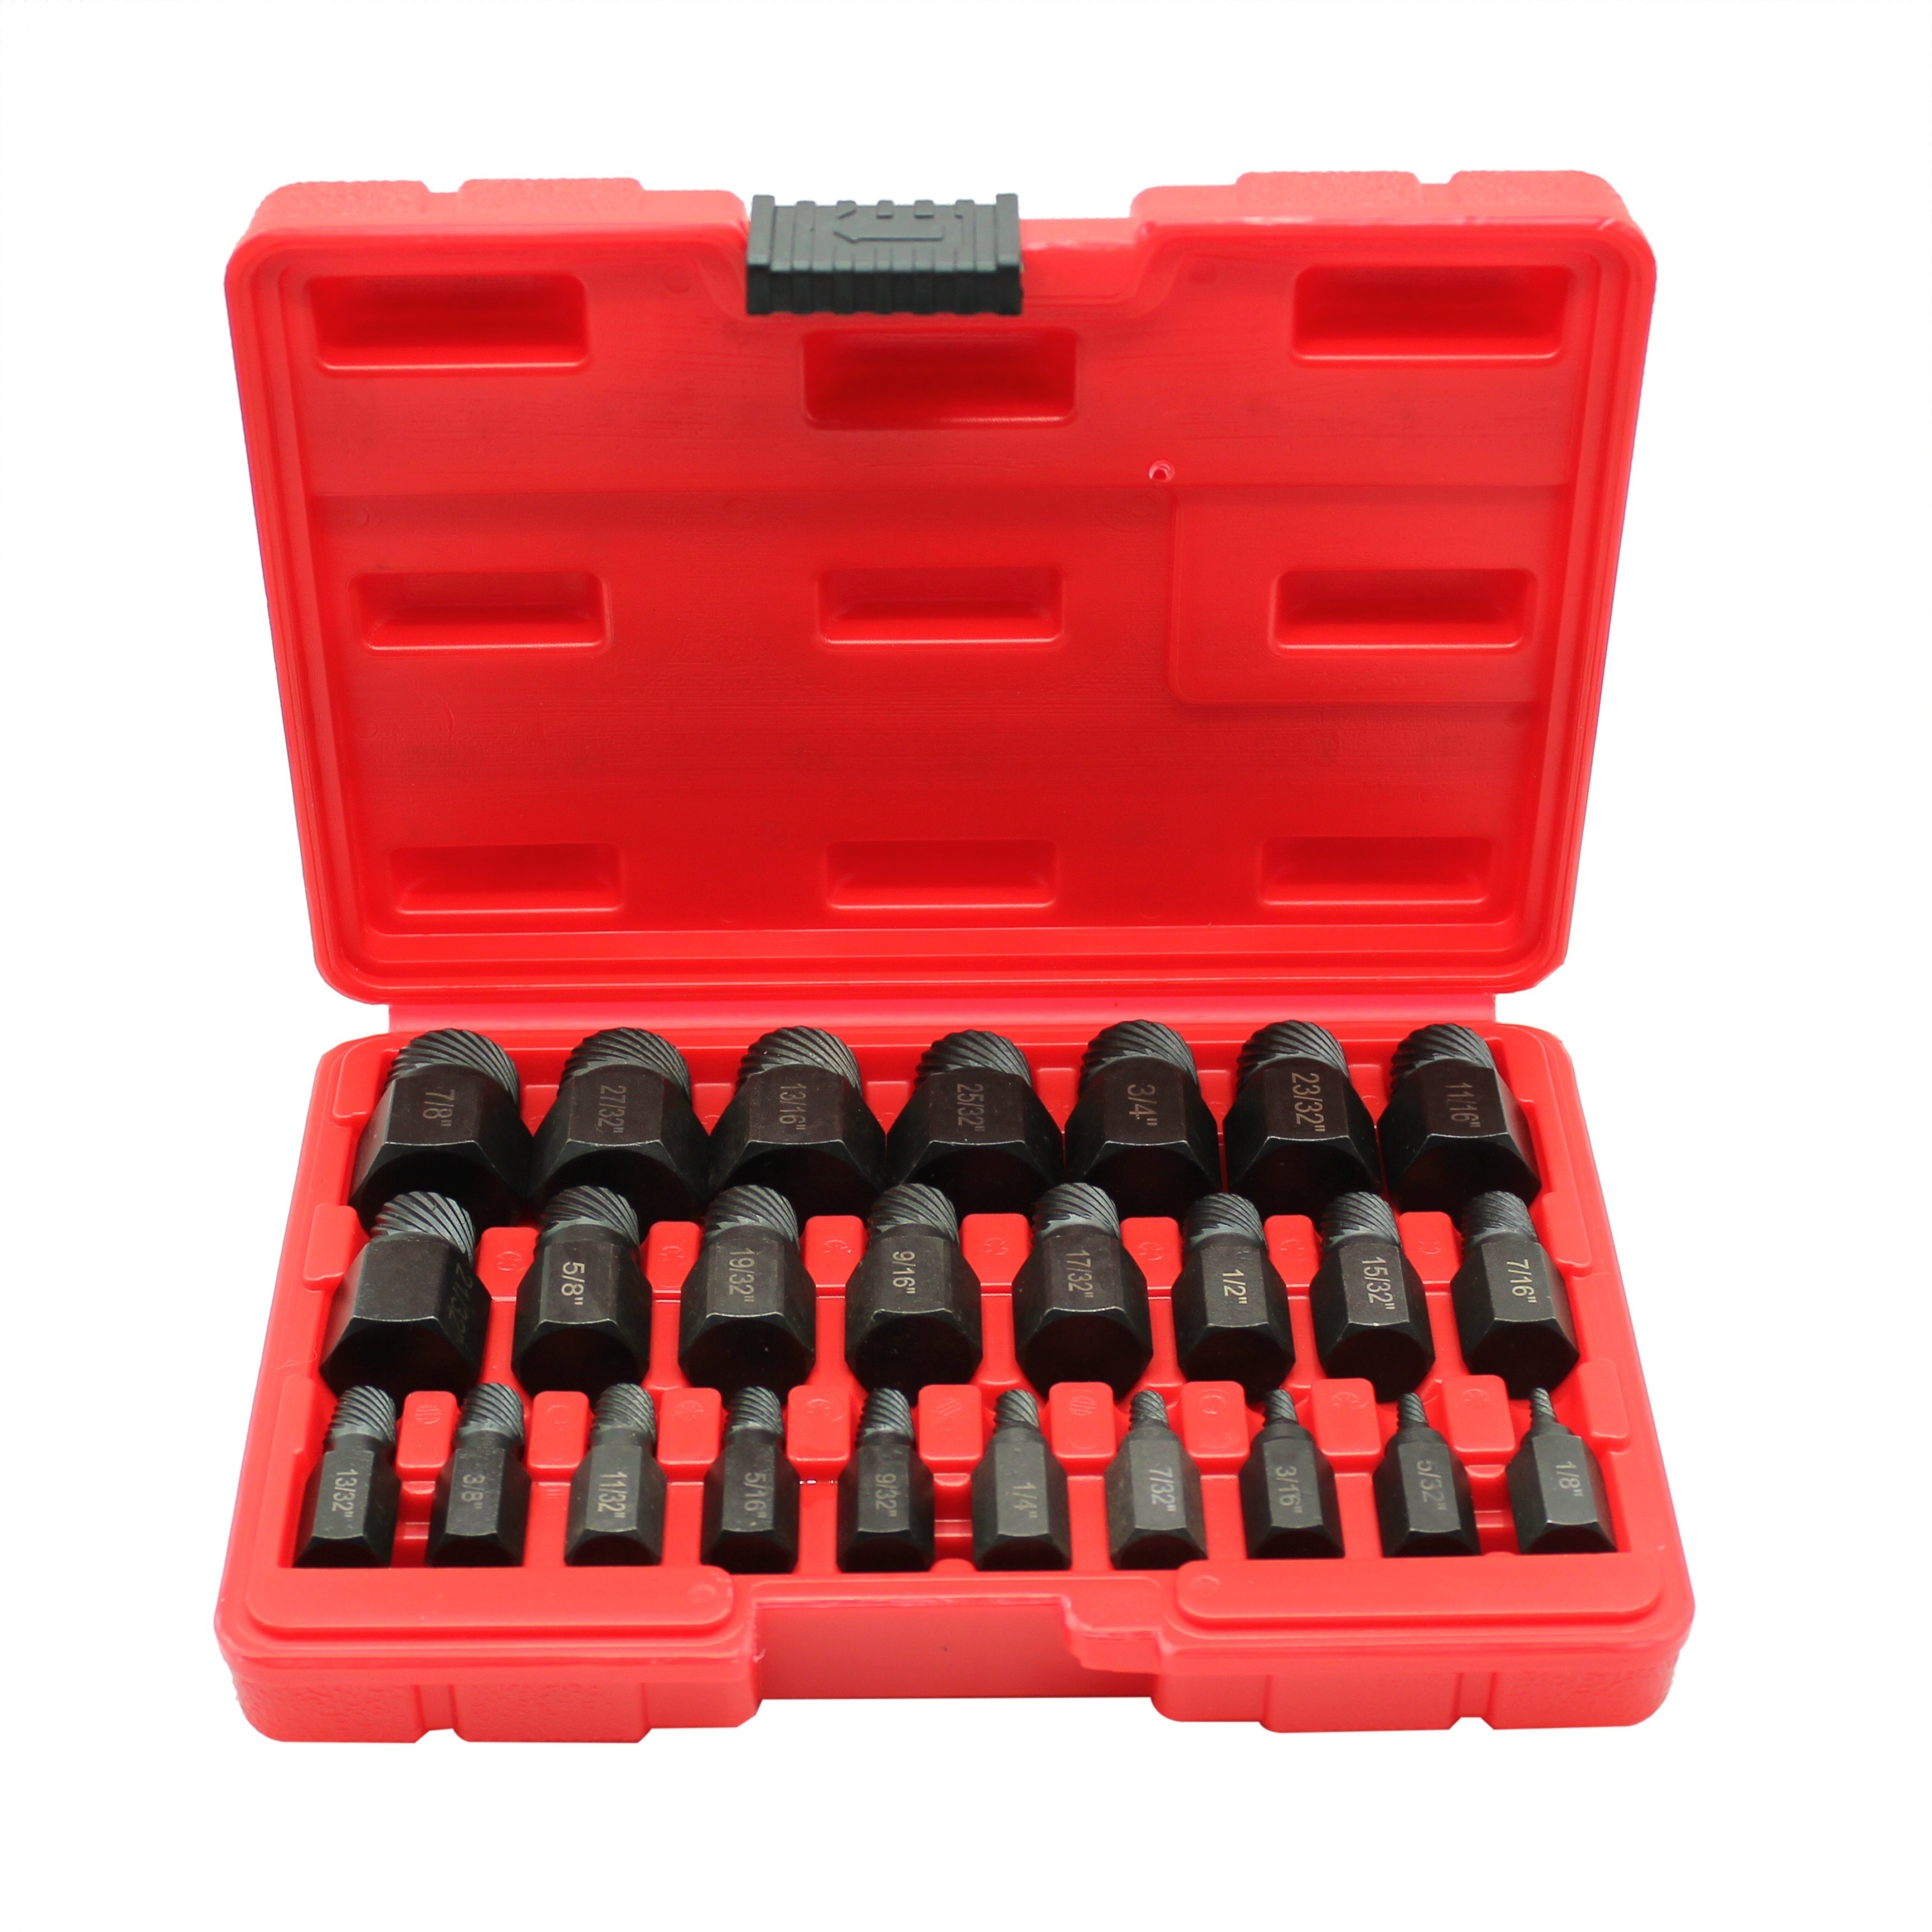 

25pc Heavy-duty Screw Extractor Set - Remove Stripped Screws &bolts With Ease - Essential Tool For Home And Workshop